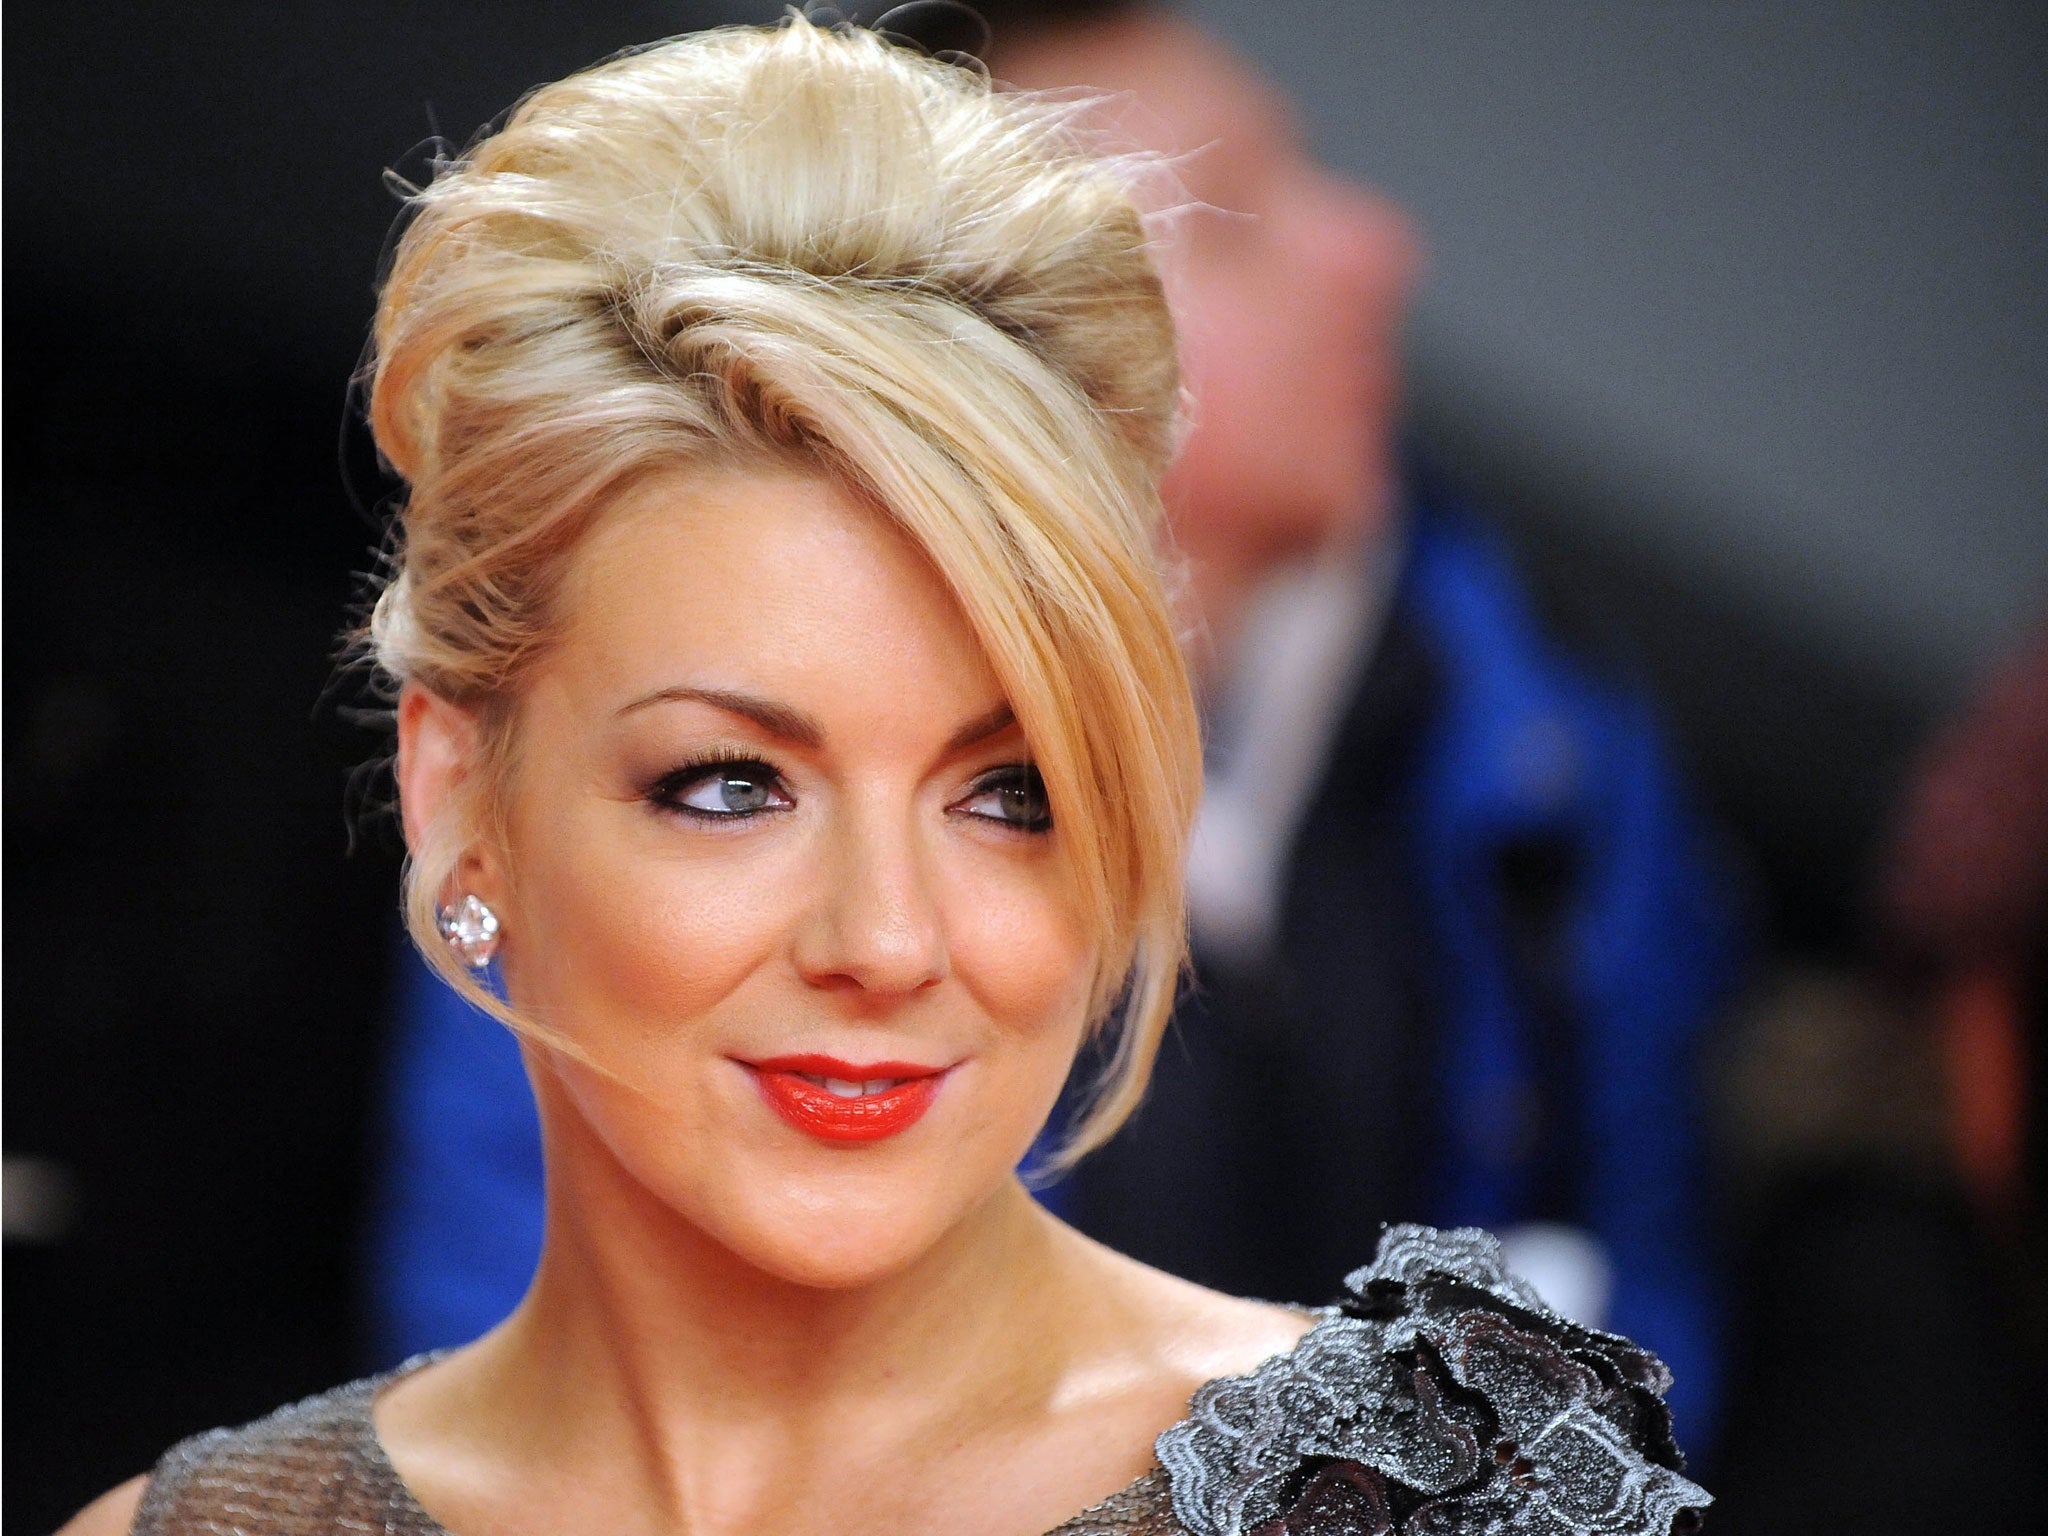 The actor Sheridan Smith will not appear in the play Funny Girl this month due to exhaustion